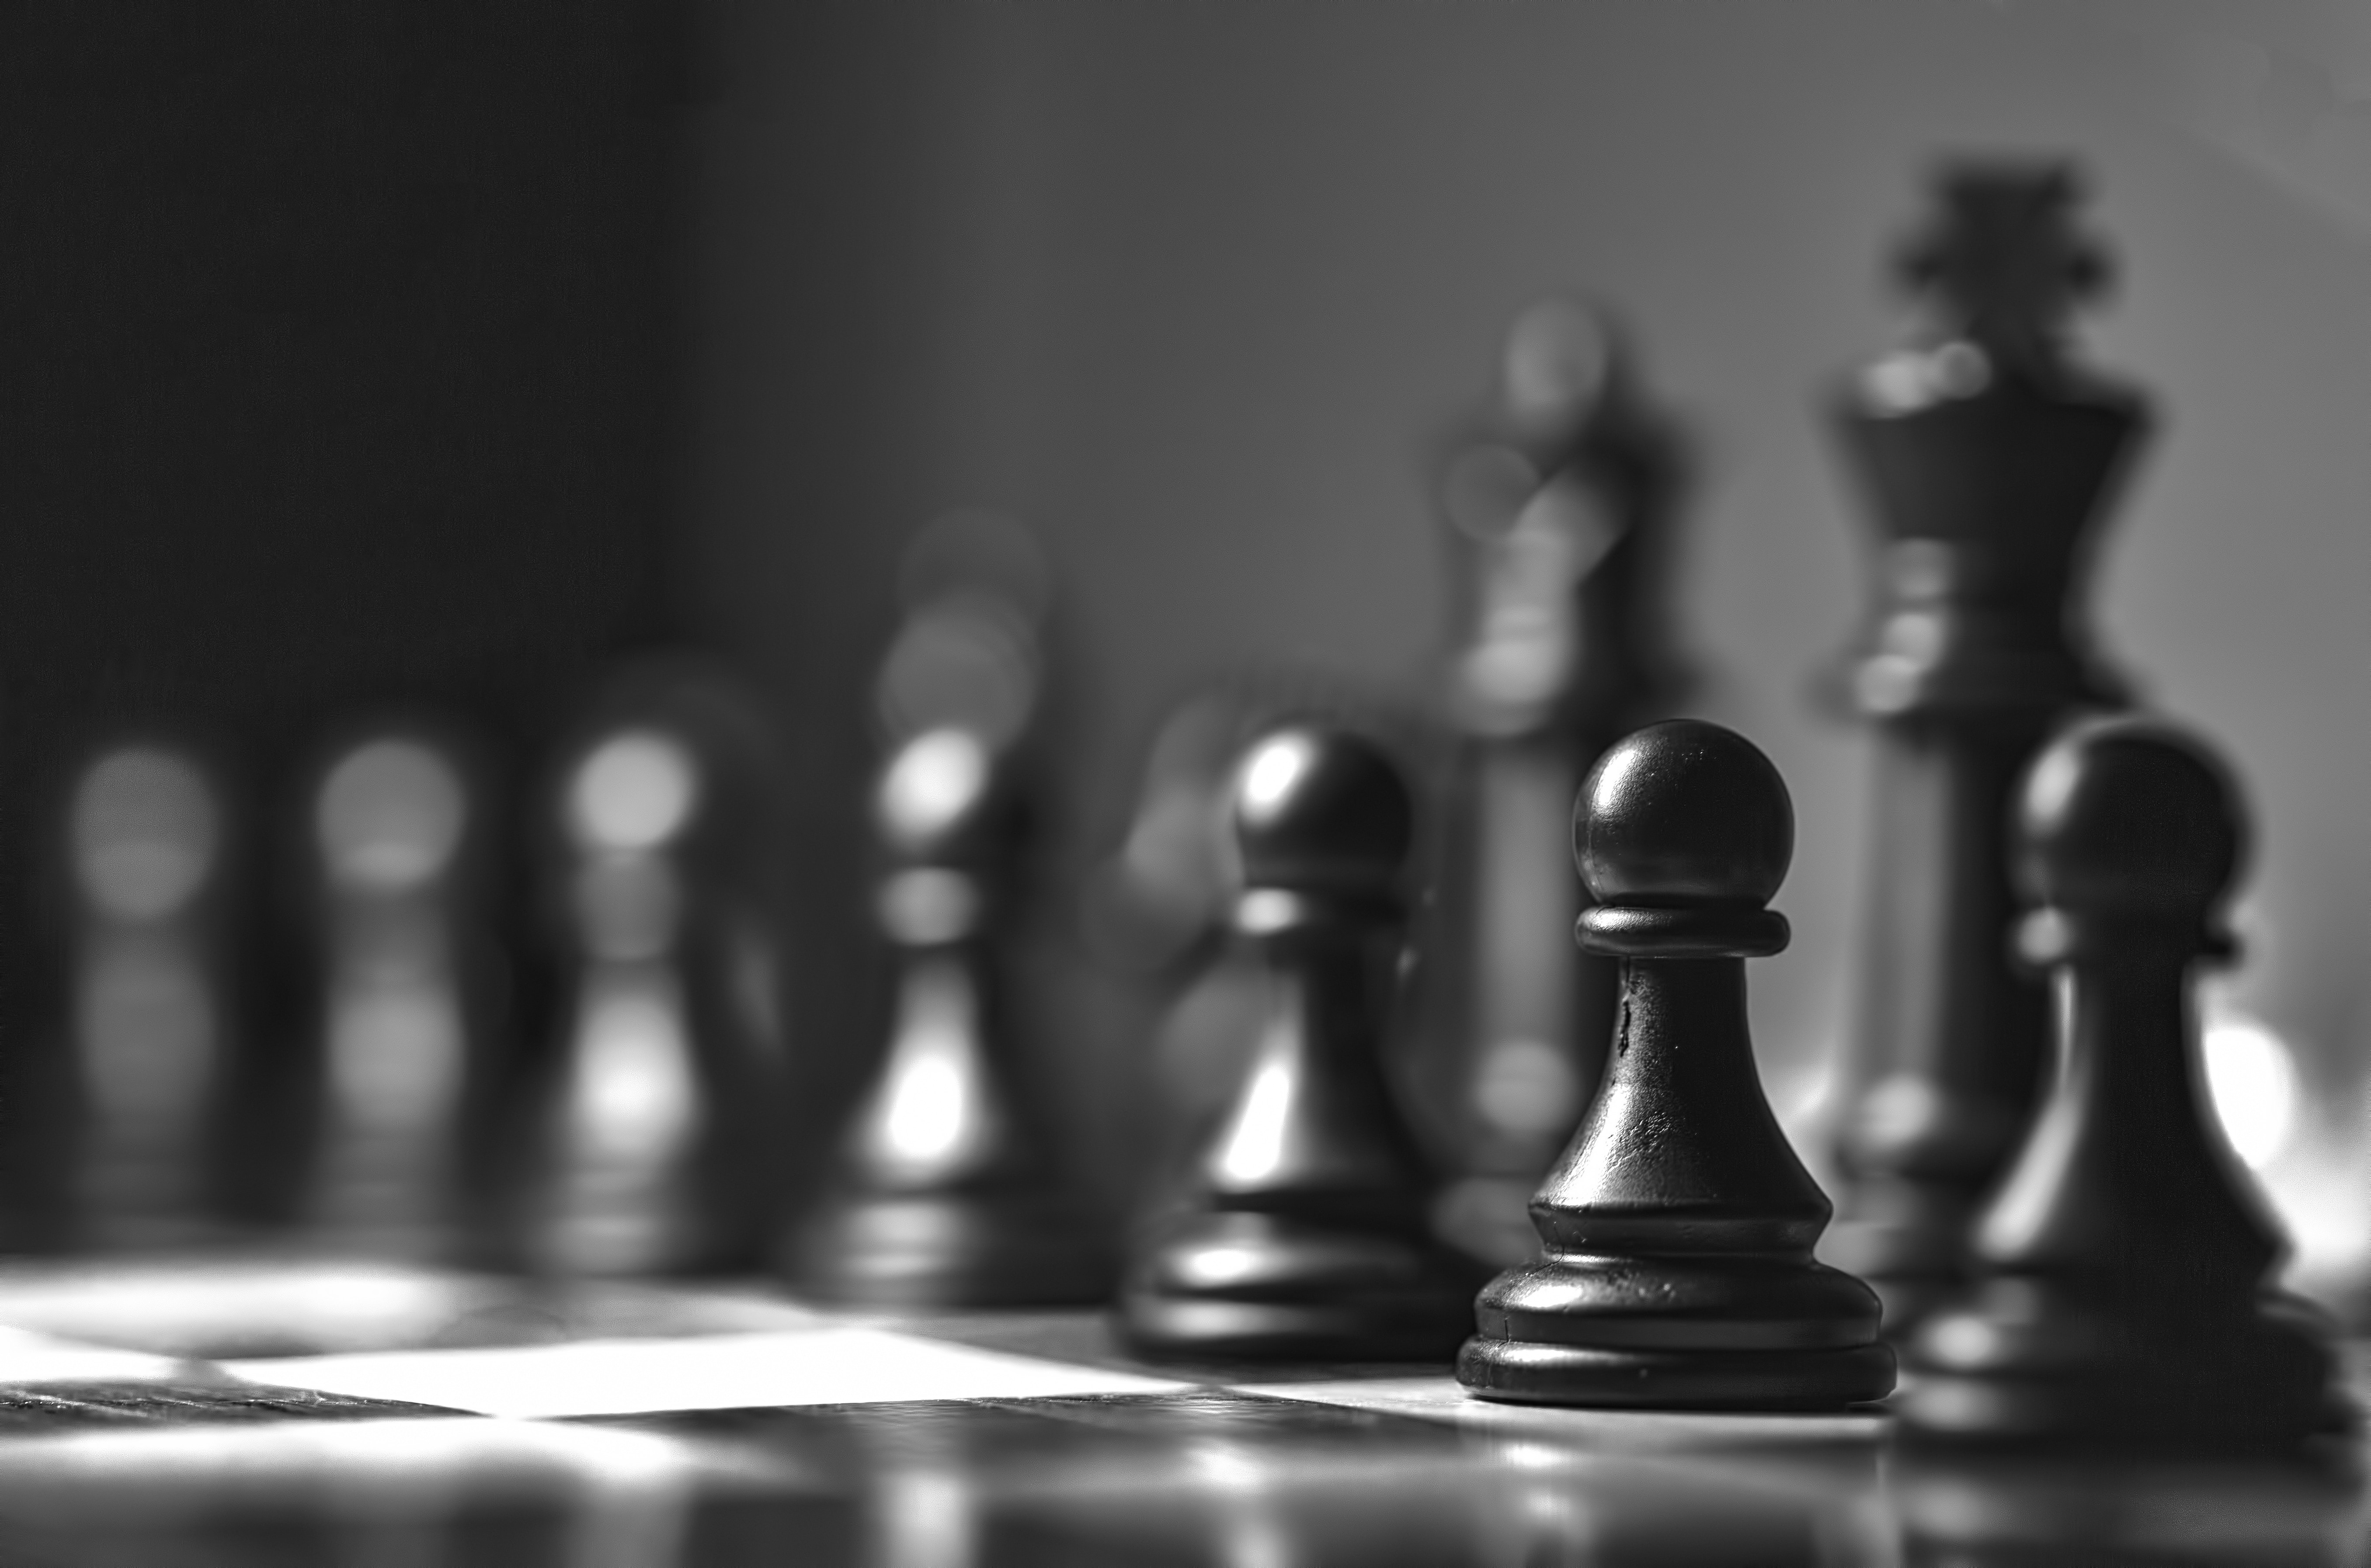 Picture of black chess pieces on a chess board in the starting position.  The image is grayscale.  Pieces in the foreground are clear, pieces furthe back are blurred.